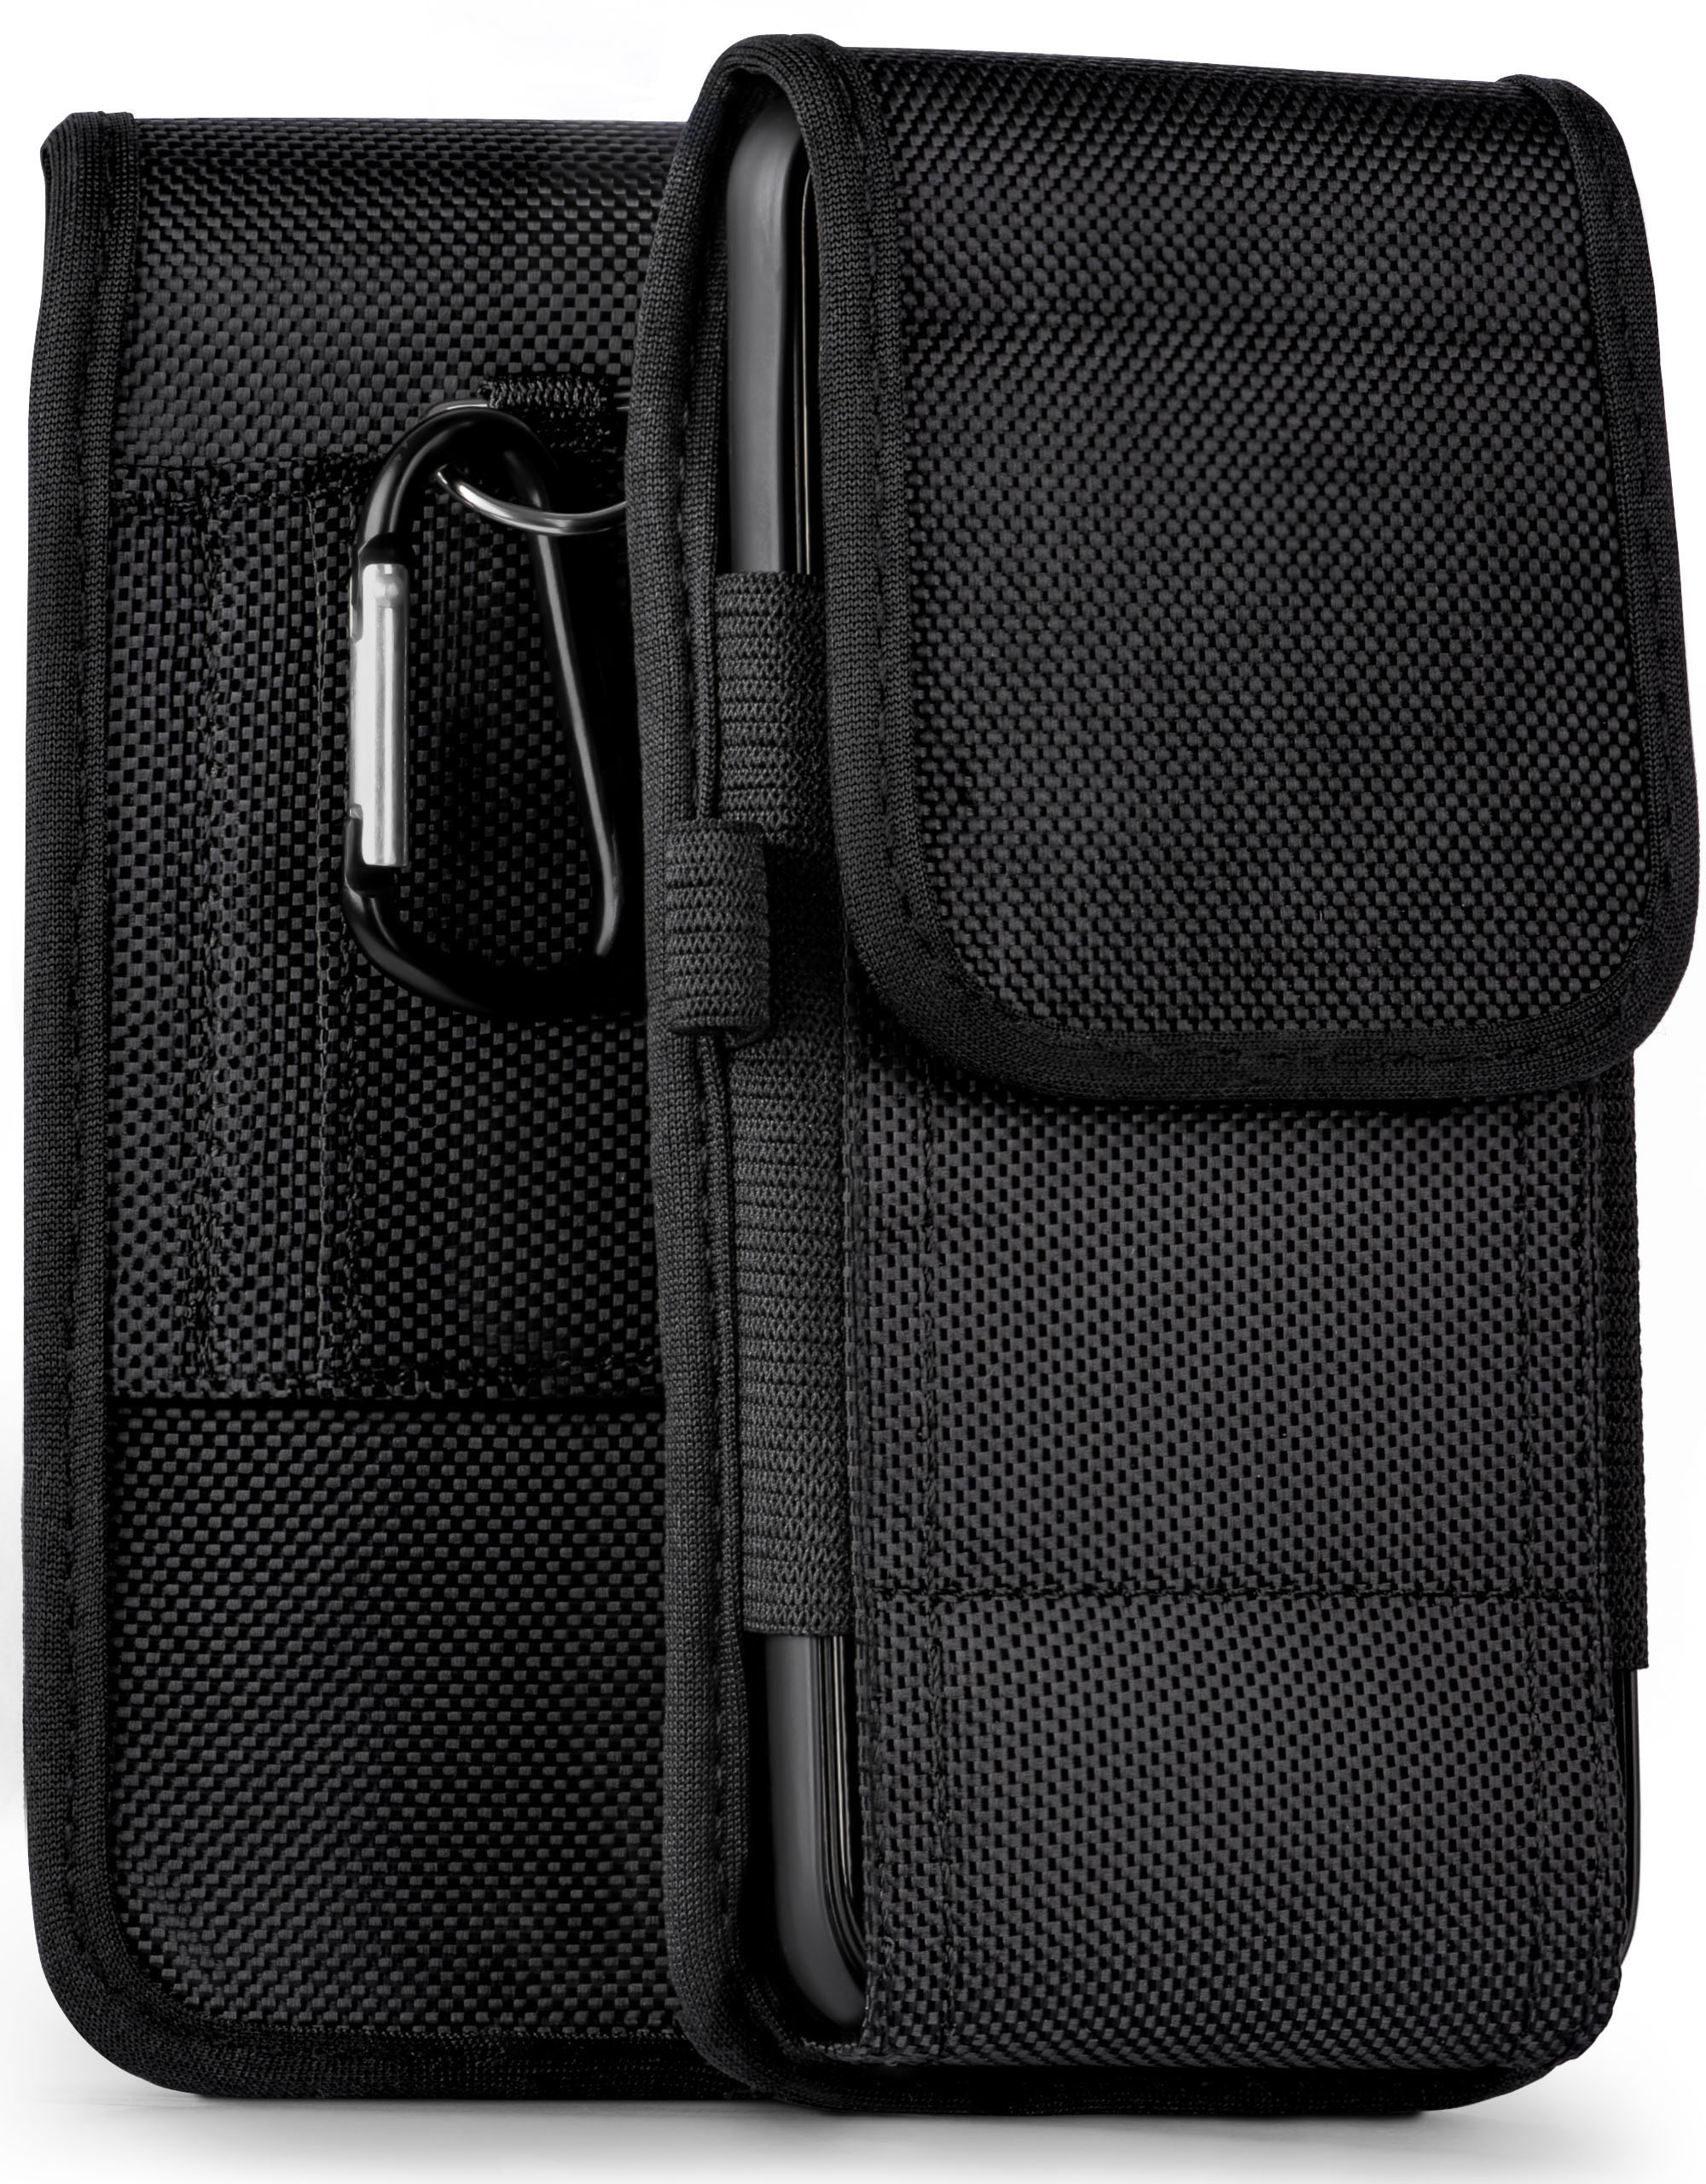 P8 Agility Case, Holster, Trail 2015, MOEX Lite Huawei,